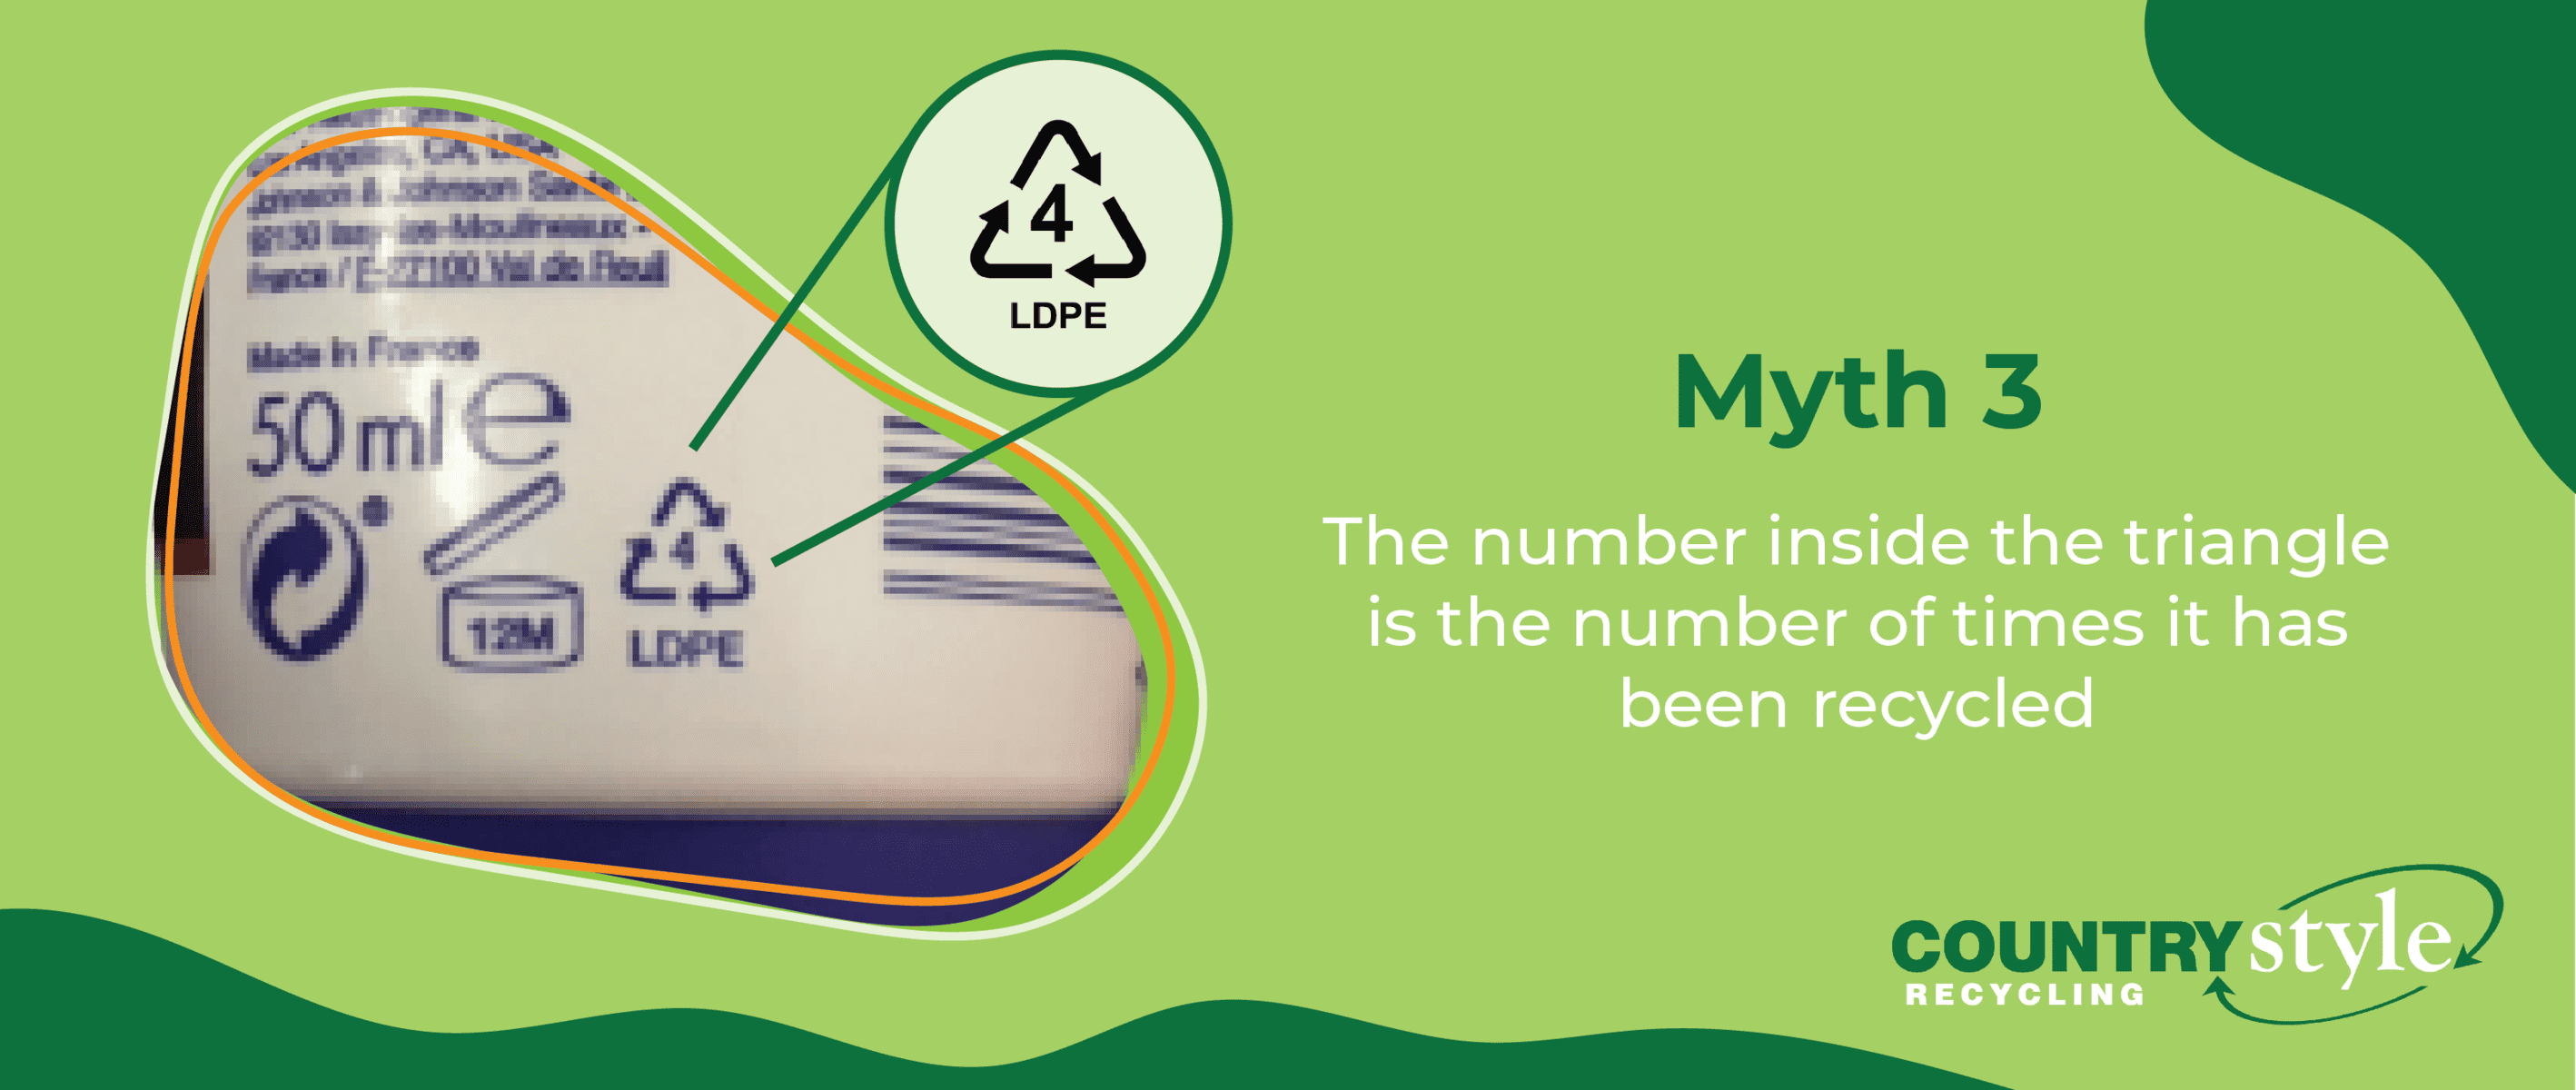 Debunking Recycling Myths – Recycle Week “Let’s Get Real About Recycling”